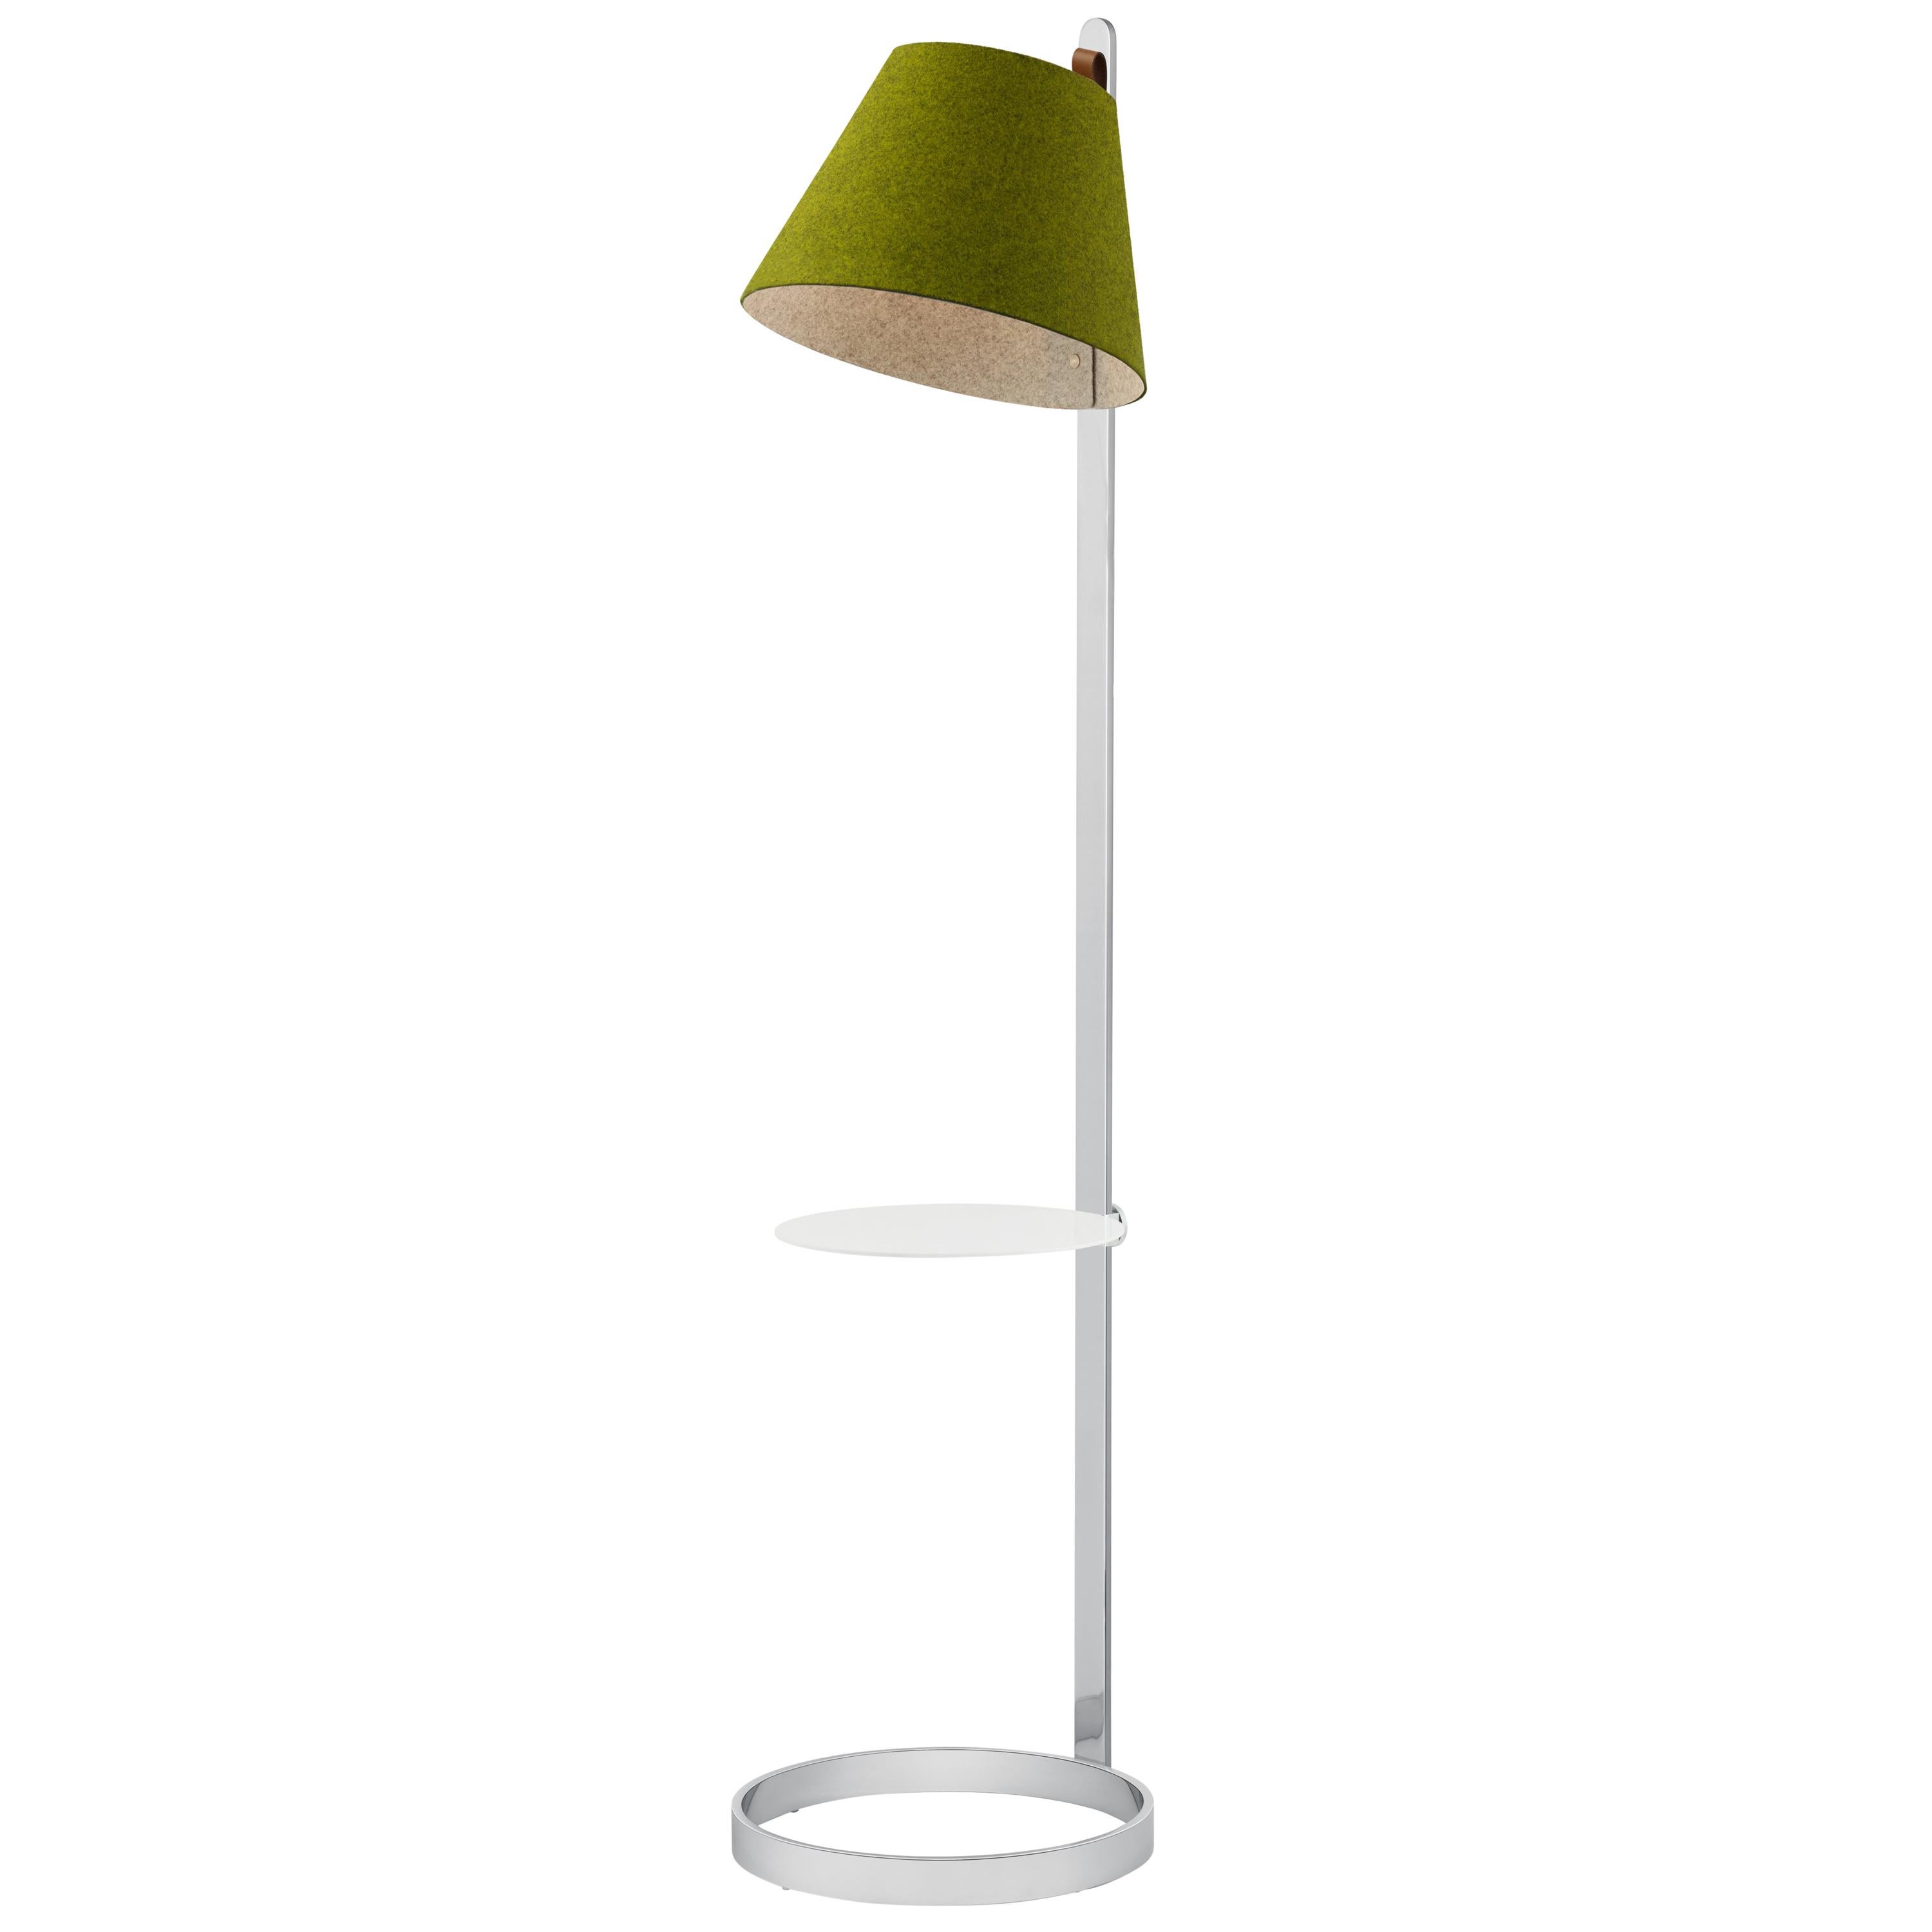 Lana Floor Lamp in Moss and Grey with Tray and Chrome Base by Pablo Designs